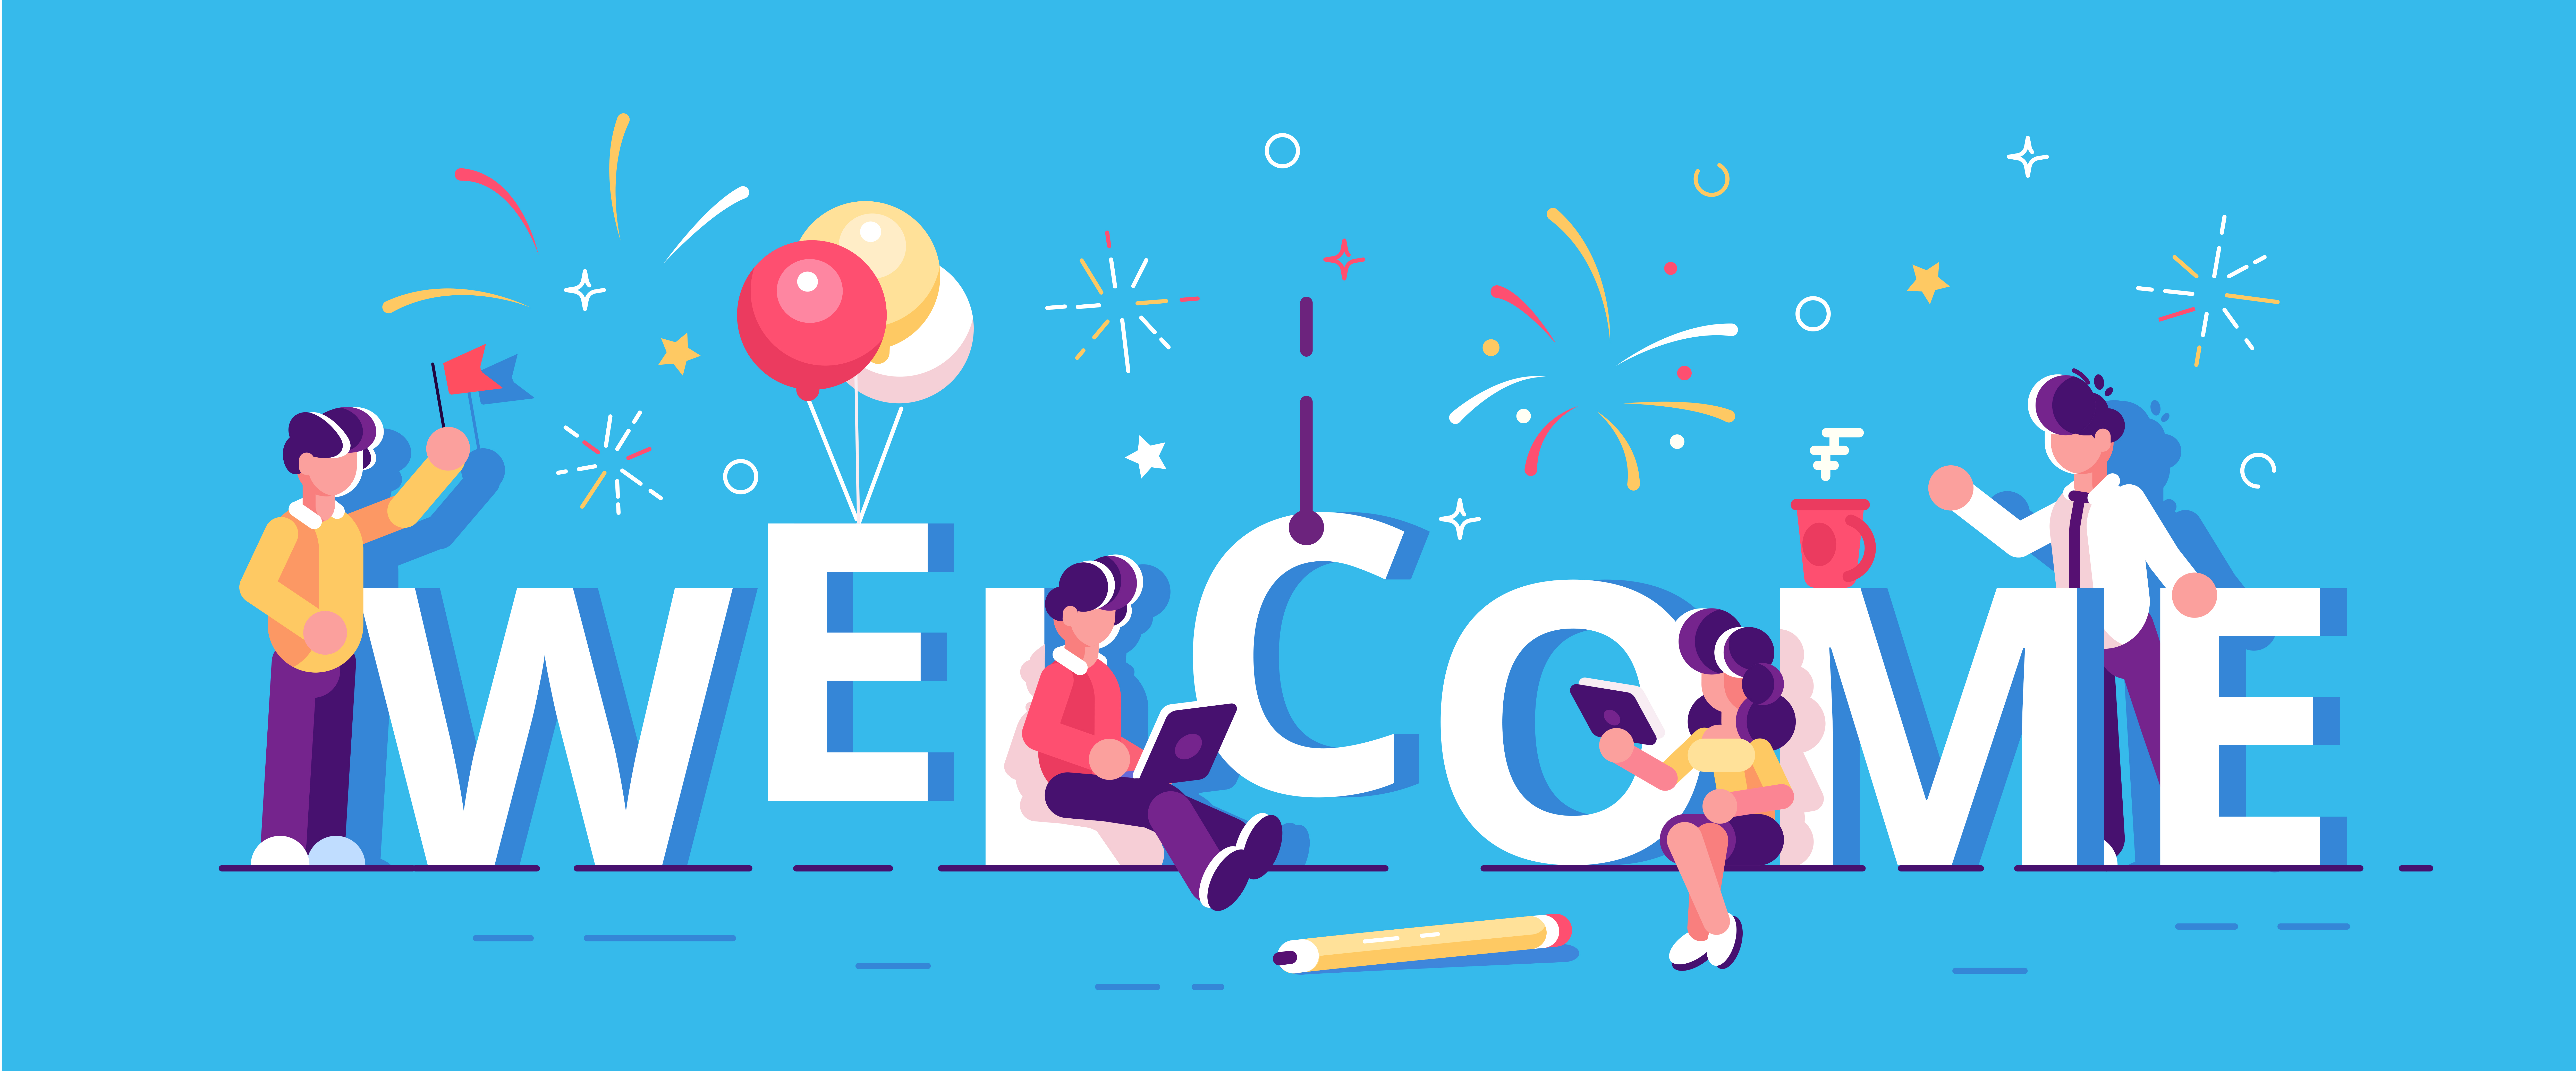 Welcome banner concept by serj marco on Dribbble